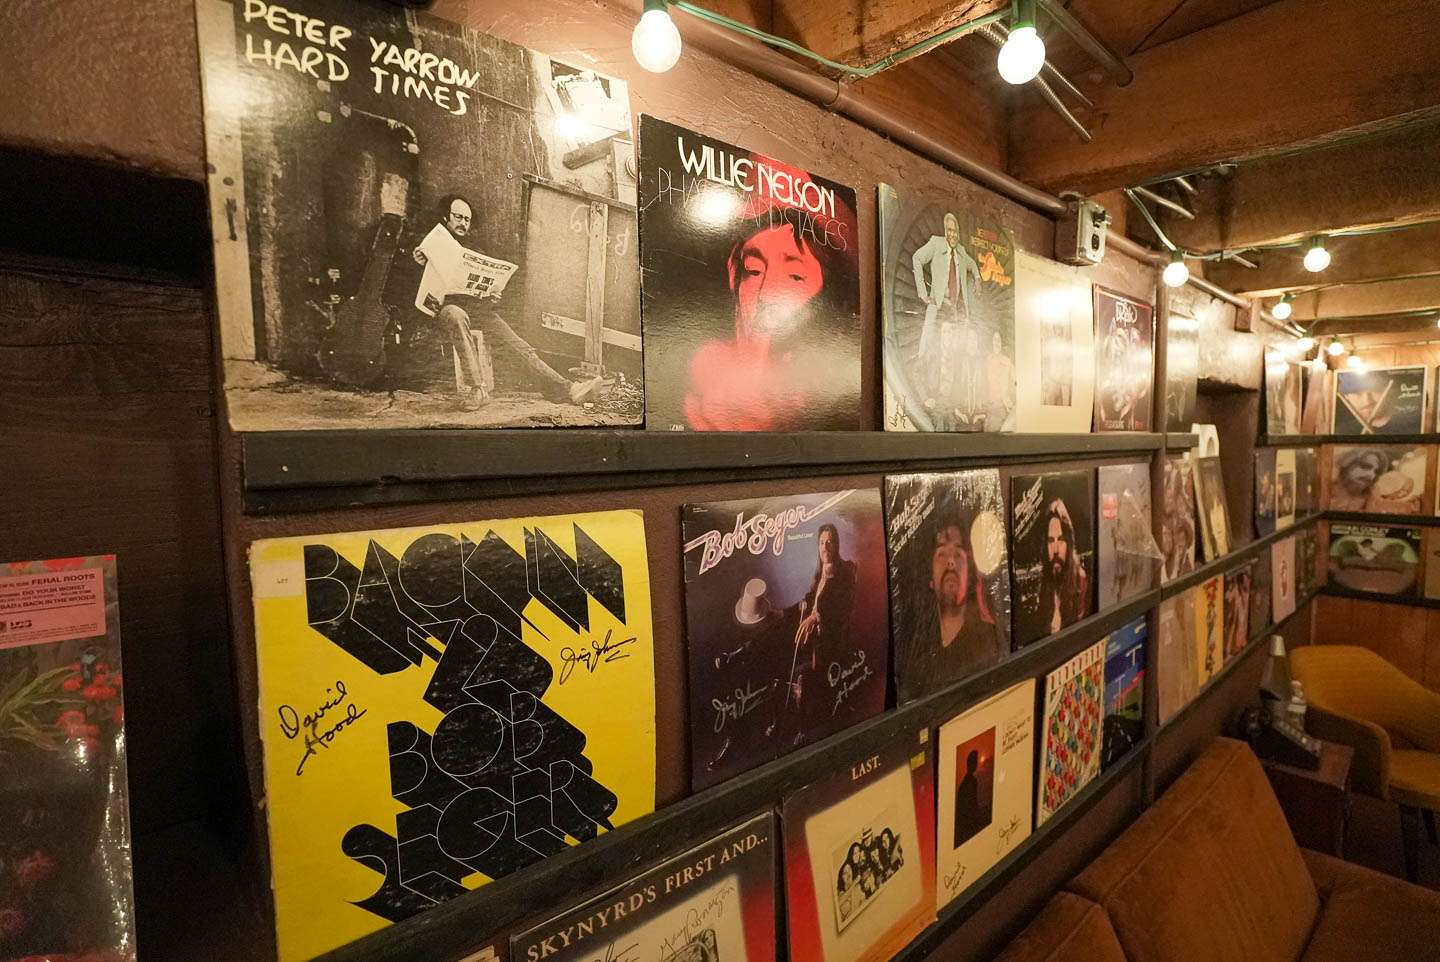 We started in the basement, which is where the bands would hang out while the studio engineers were busy working above them in between takes. The studio was recently restored (with help from Dr. Dre!) and albums of music produced here line the walls. 